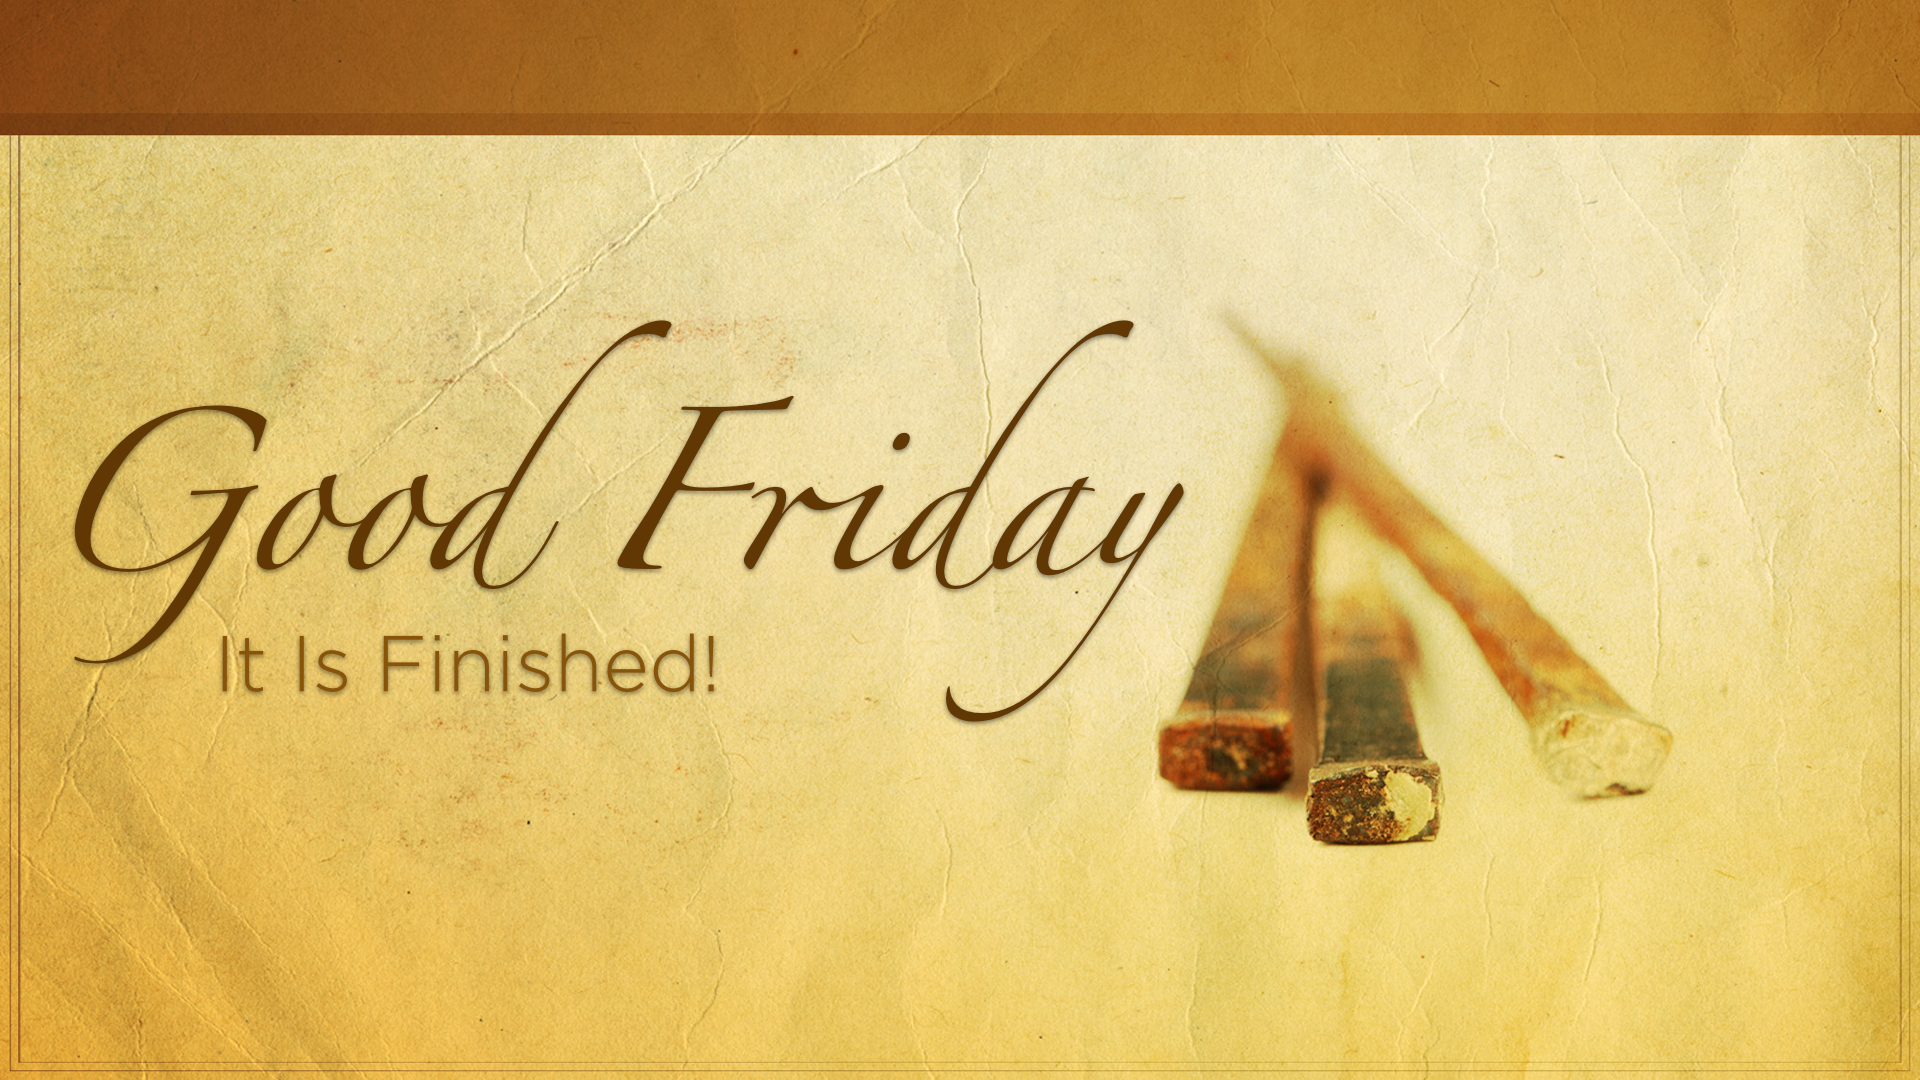 Happy Good Friday 2015 HD Wishes Greeting Wallpapers with Quotes ...